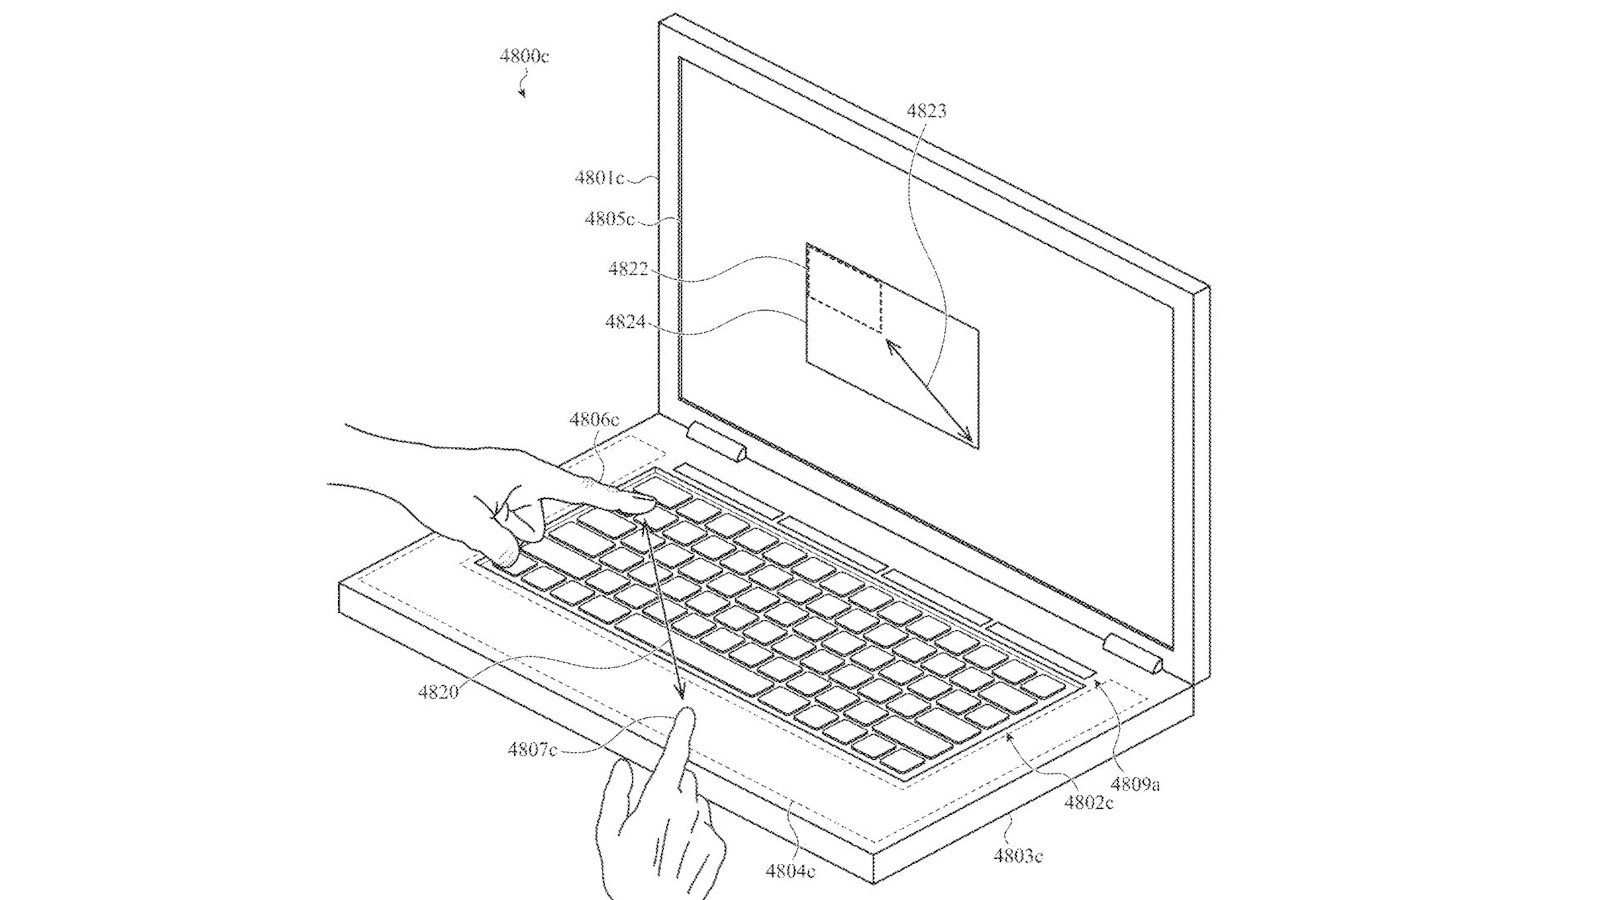 An illustration from Apple's design patent showing a touch keyboard